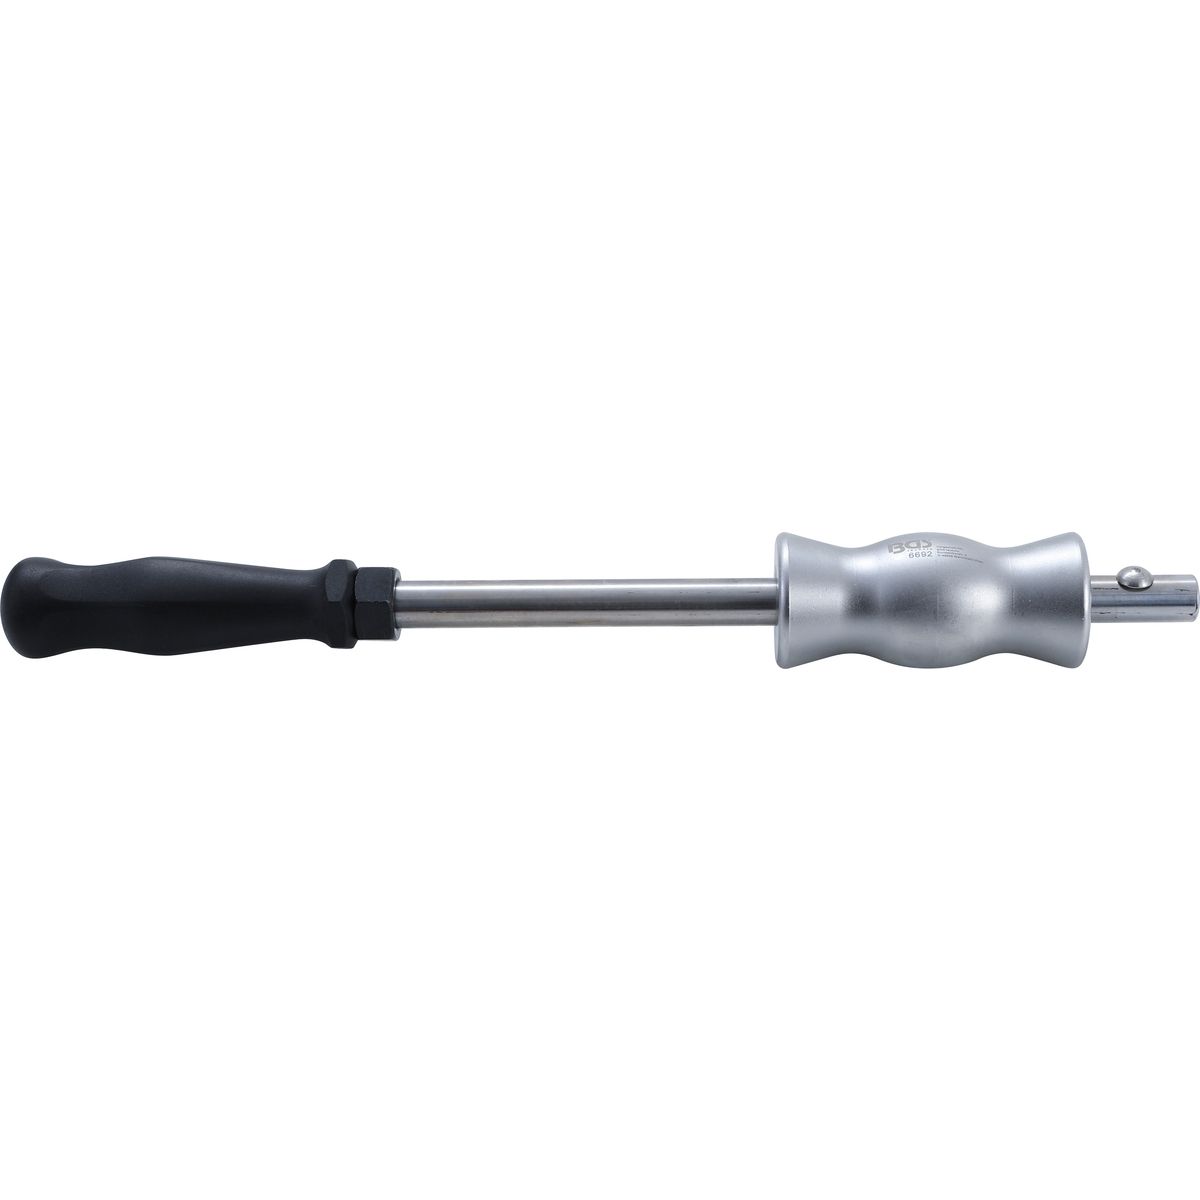 Gasoline Injector Puller | for Ford